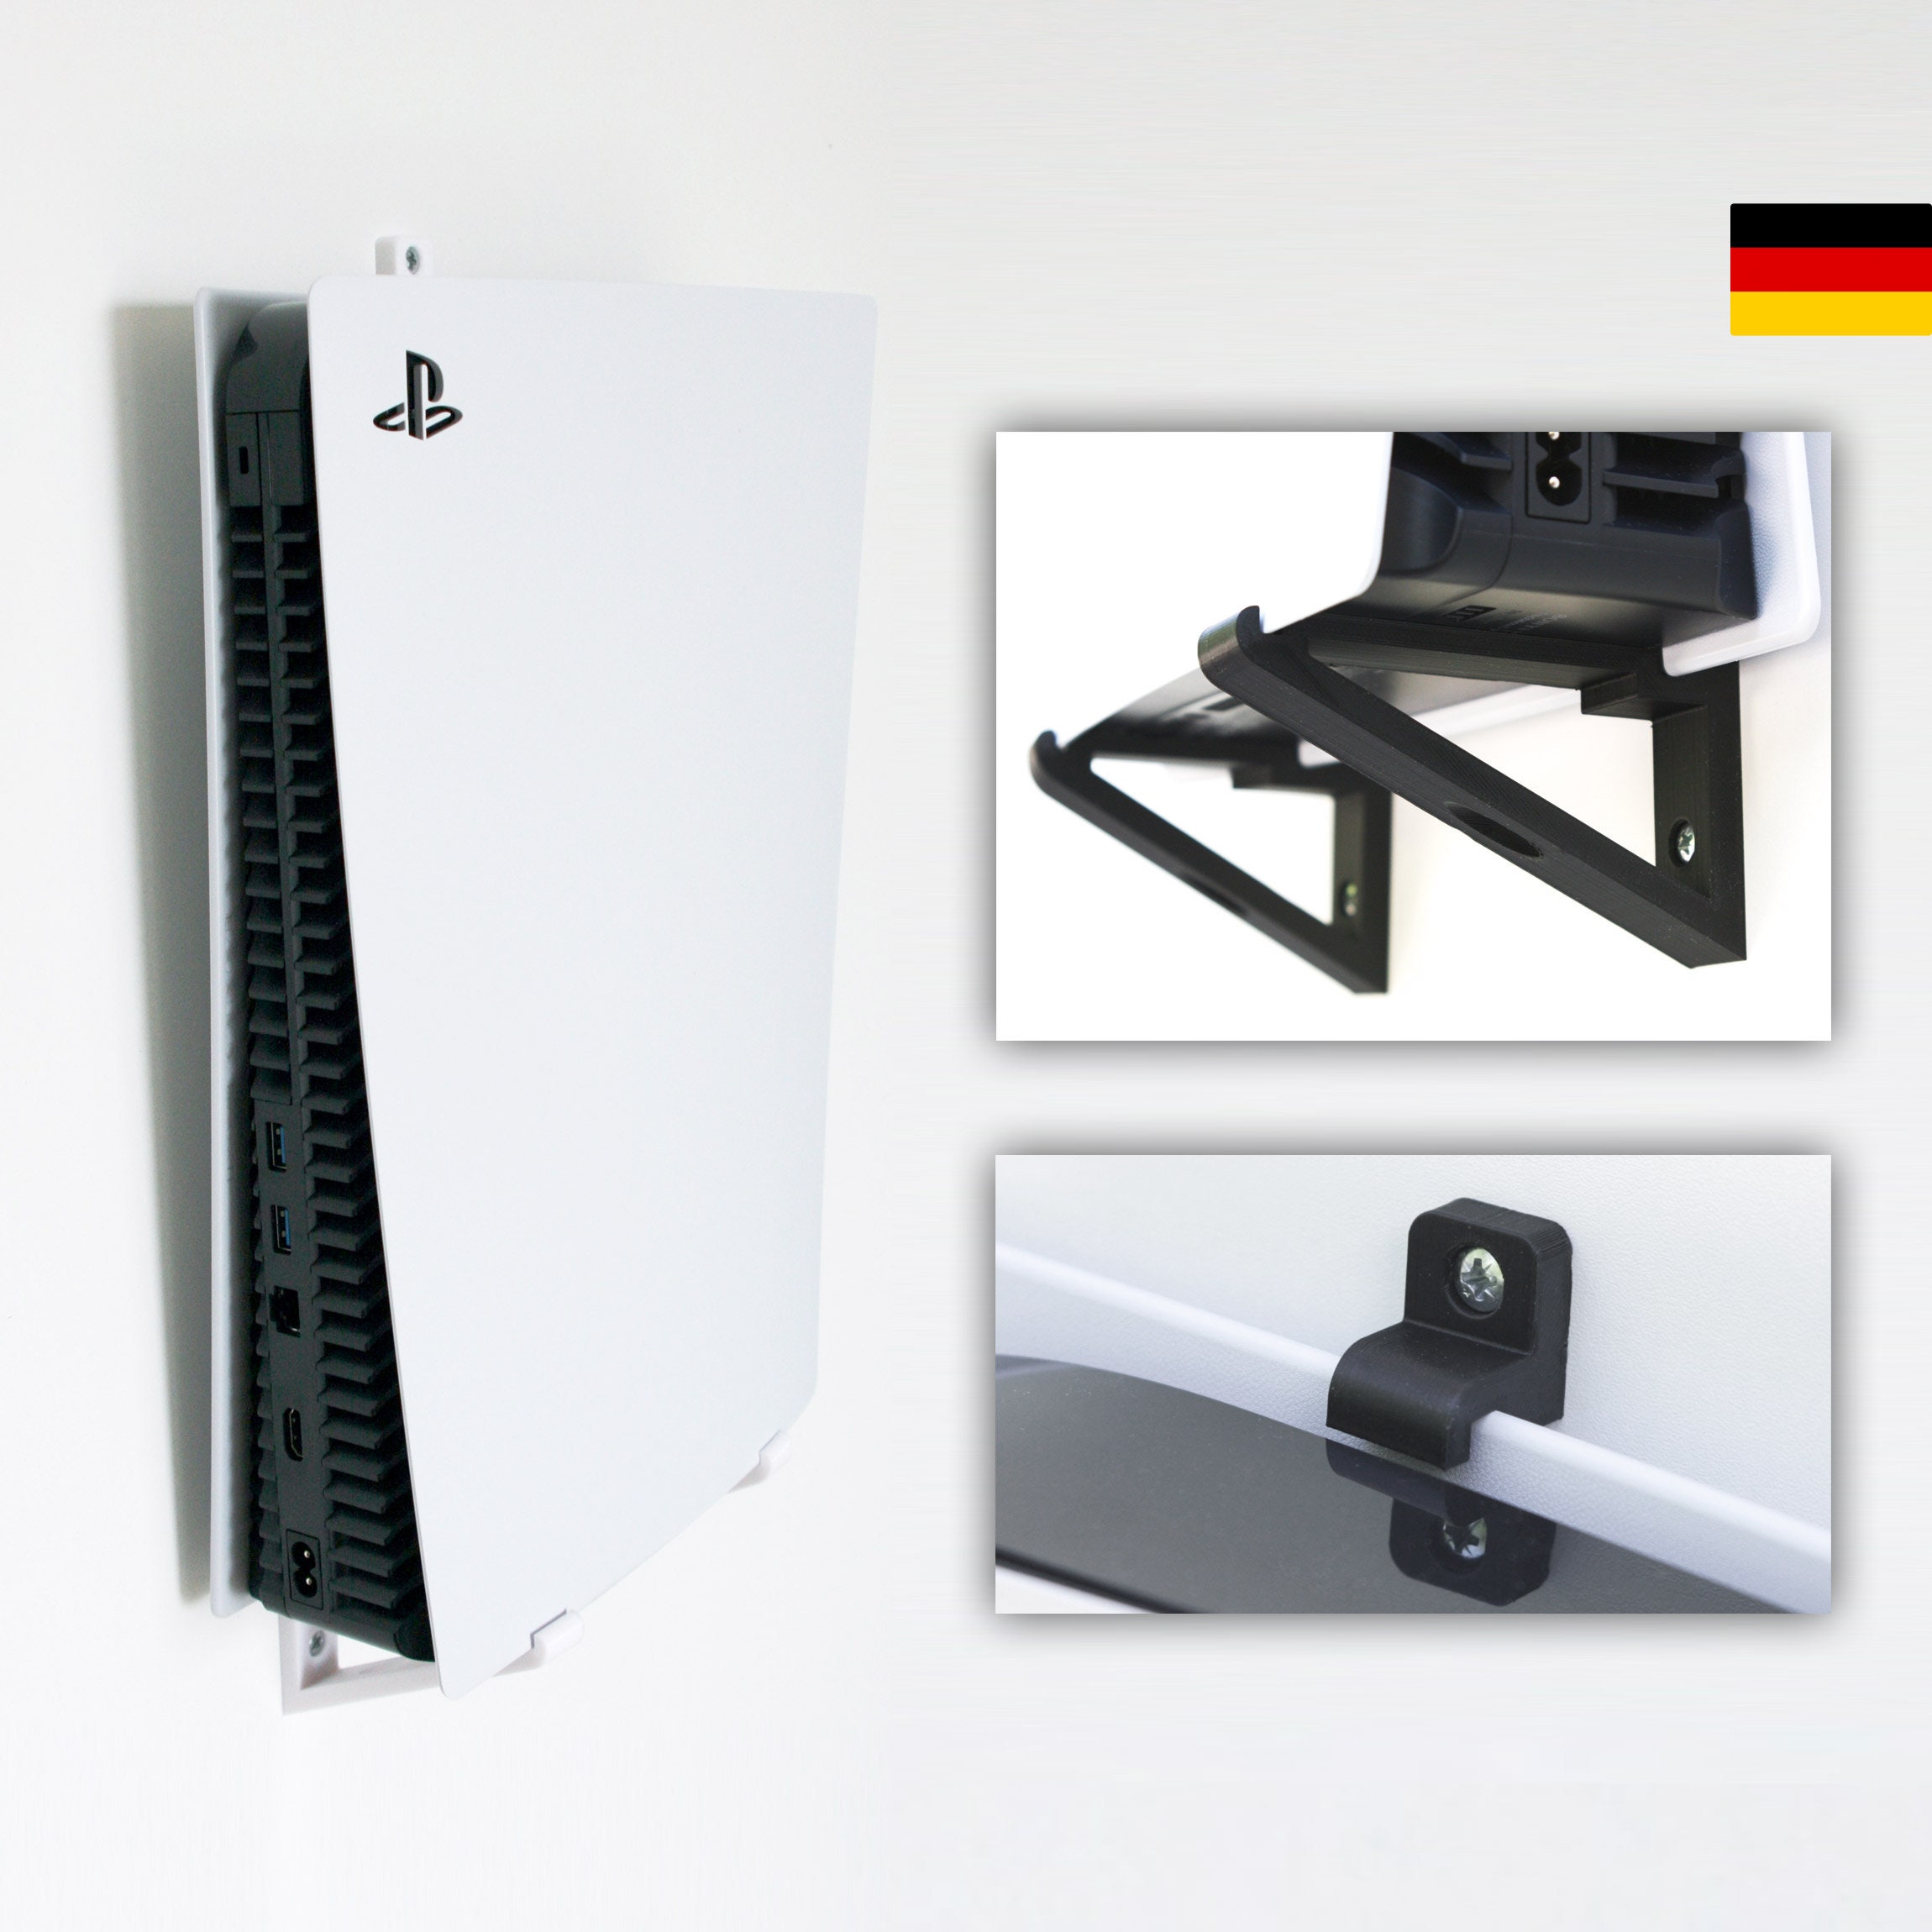 PS5 Wall Mount Kit Horizontal, PS5 Shelf Wall Mount Horizontal for PS5 Disc  & Digital, PS5 Accessories Base Stand, Upgraded Floating PS5 Wall Mount